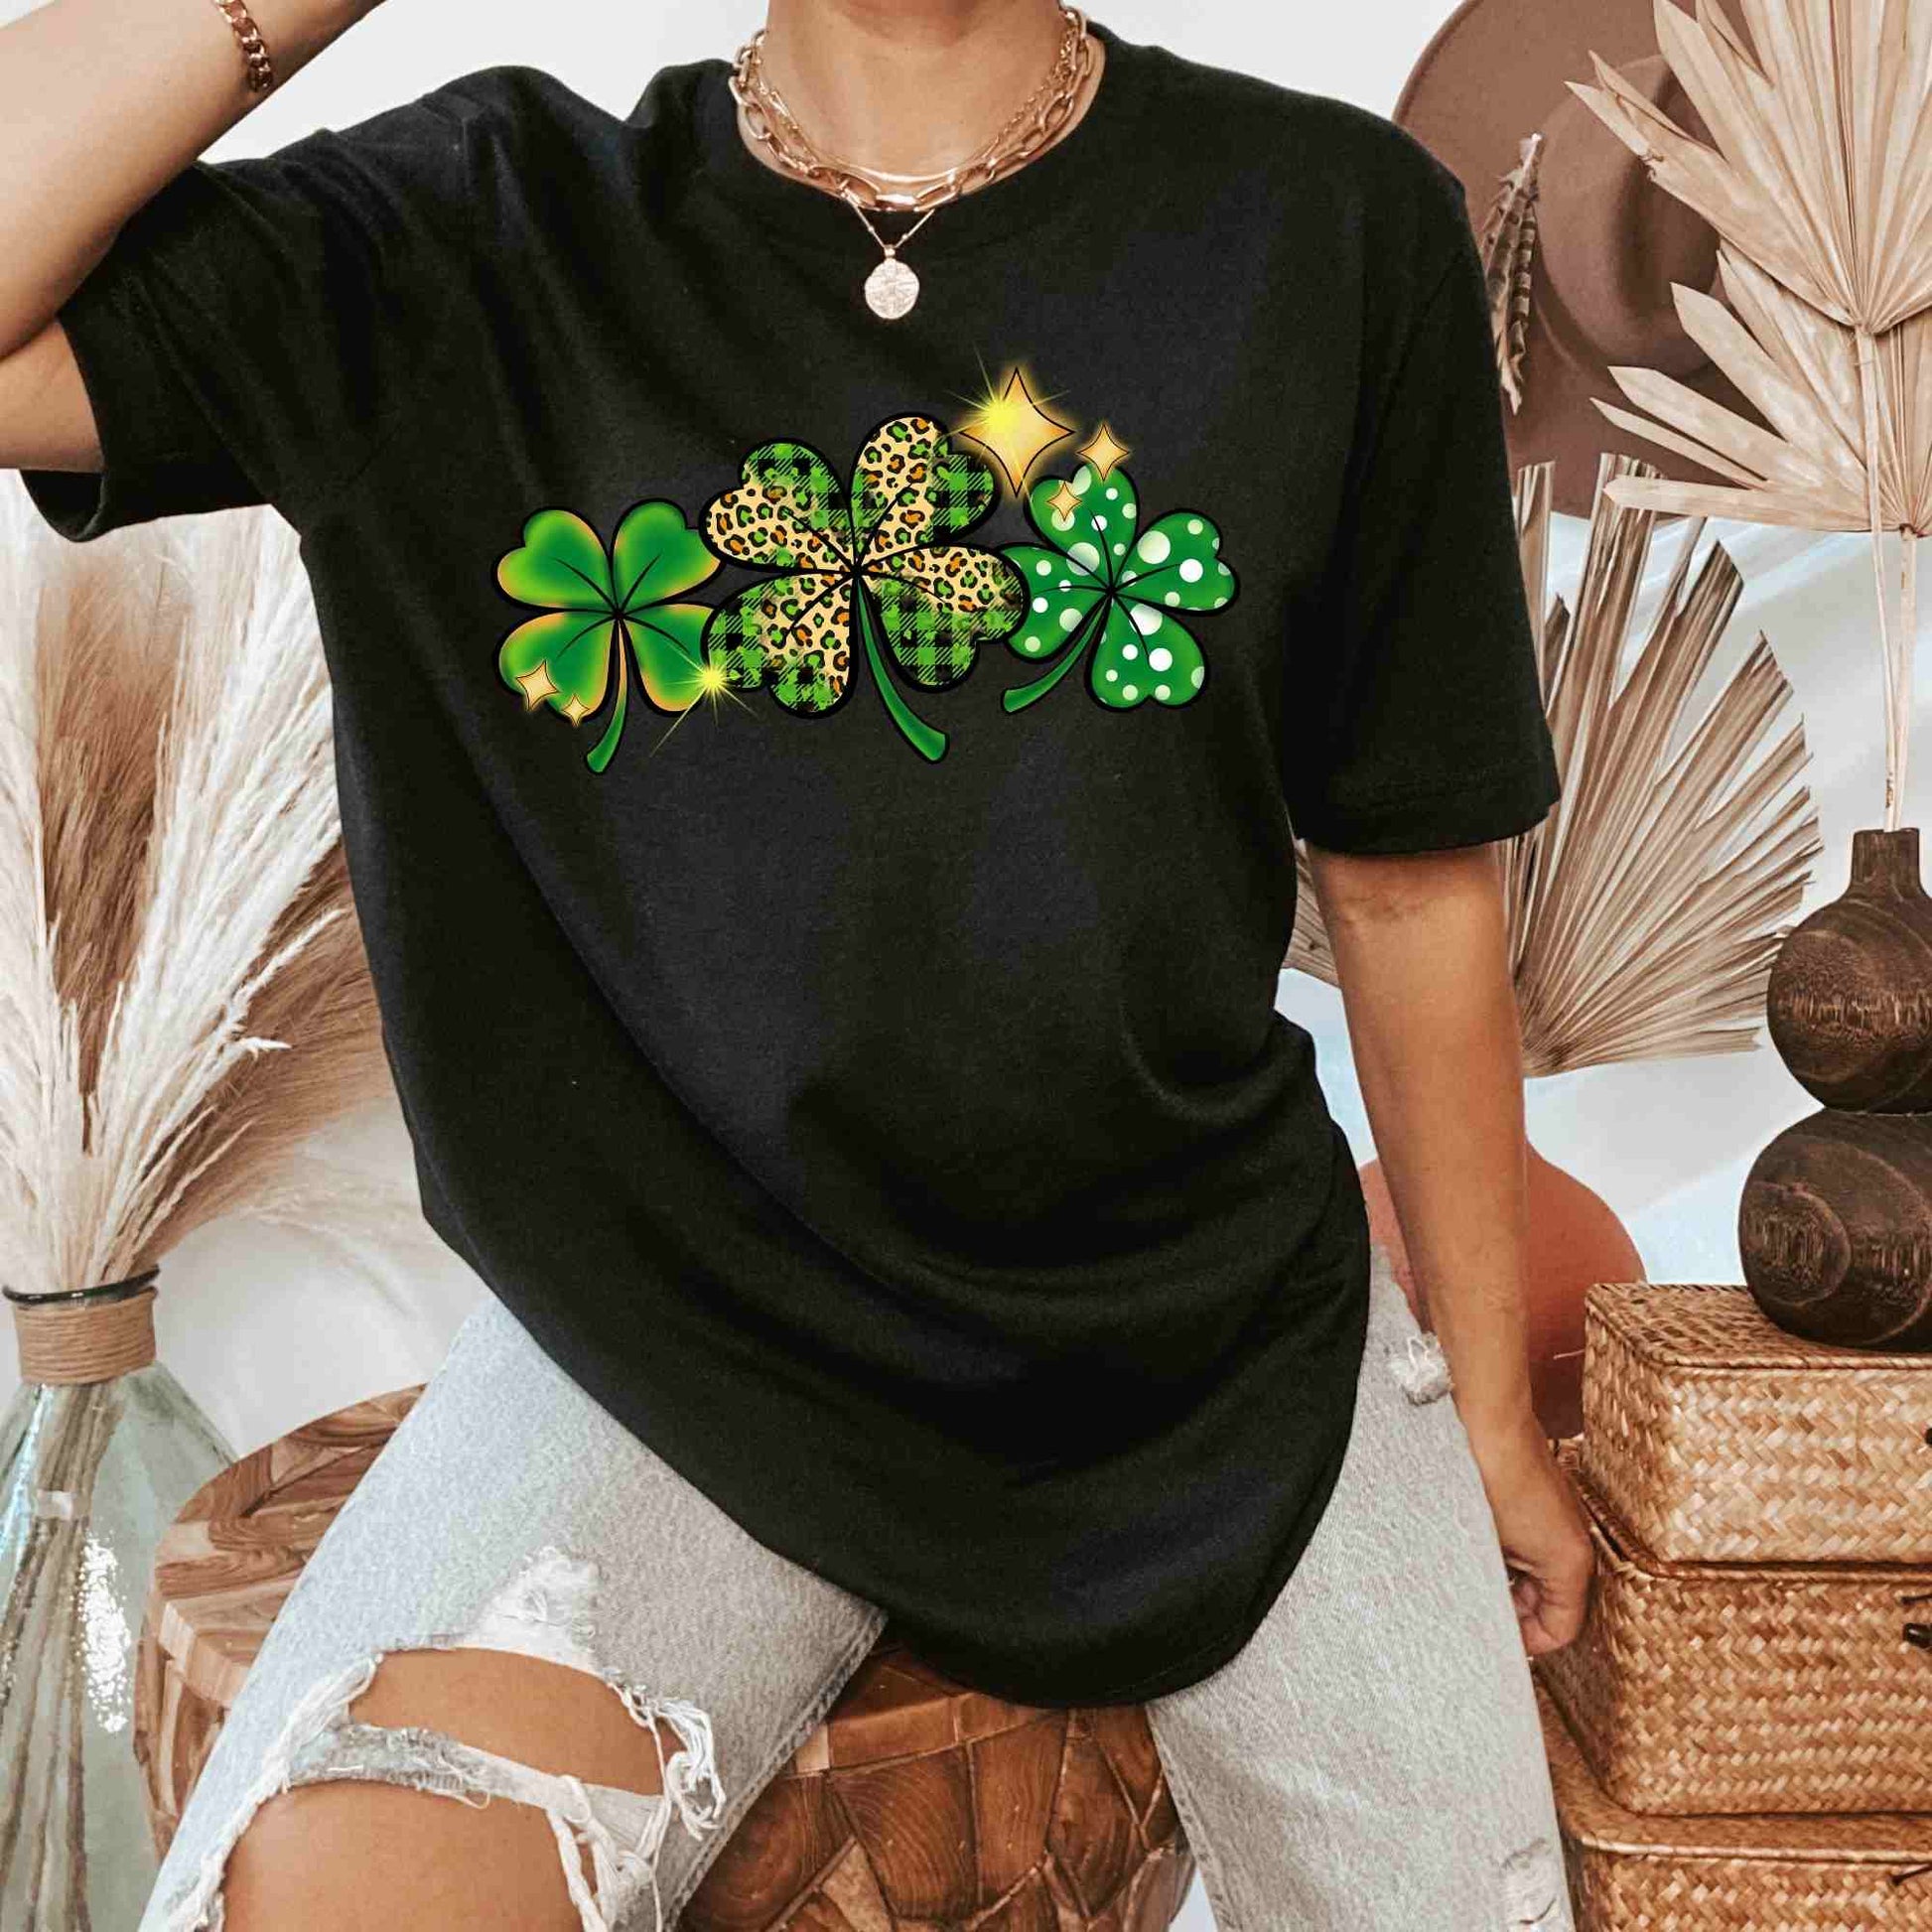 Four Leaf Clovers Patrick's Day Shirt, Happy St. Patrick's Day Shirt, Cute Shamrock Lucky Clover Shirt